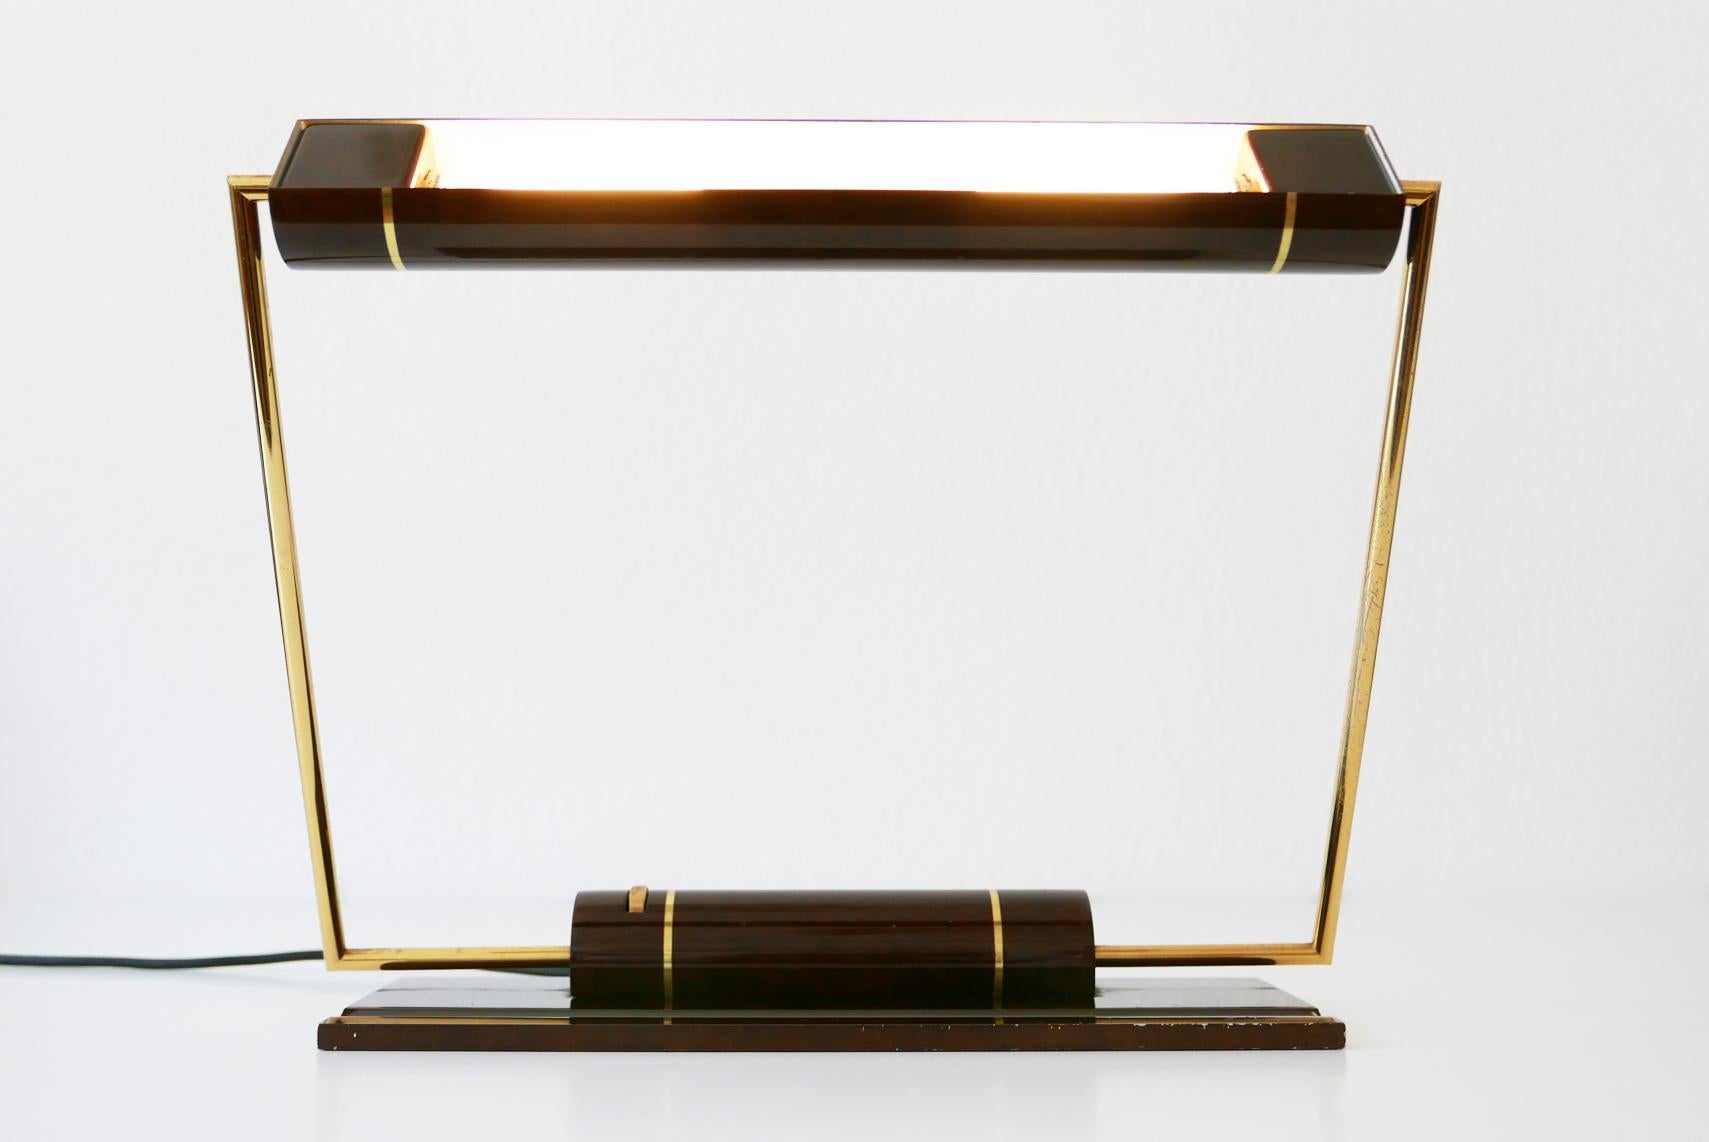 American Exceptional Modernist Banker Desk Light or Table Lamp by George Kovacs USA 1980s